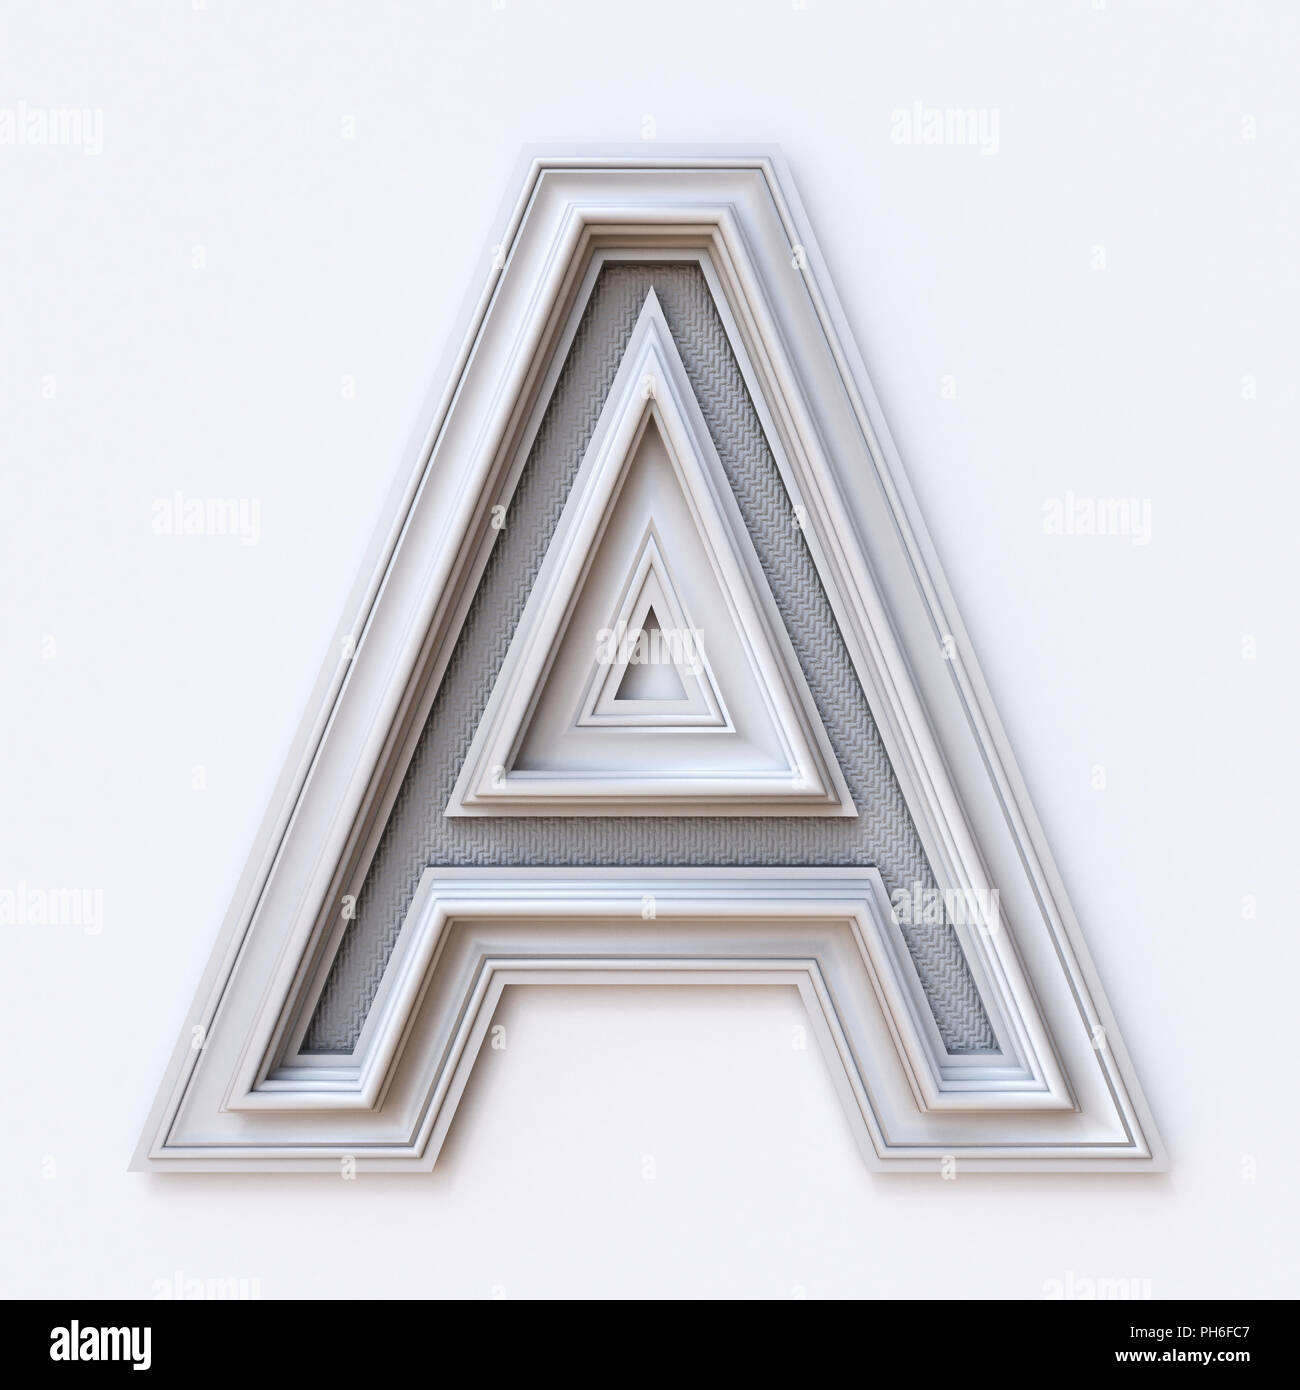 White picture frame font Letter A 3D rendering illustration isolated on white background Stock Photo